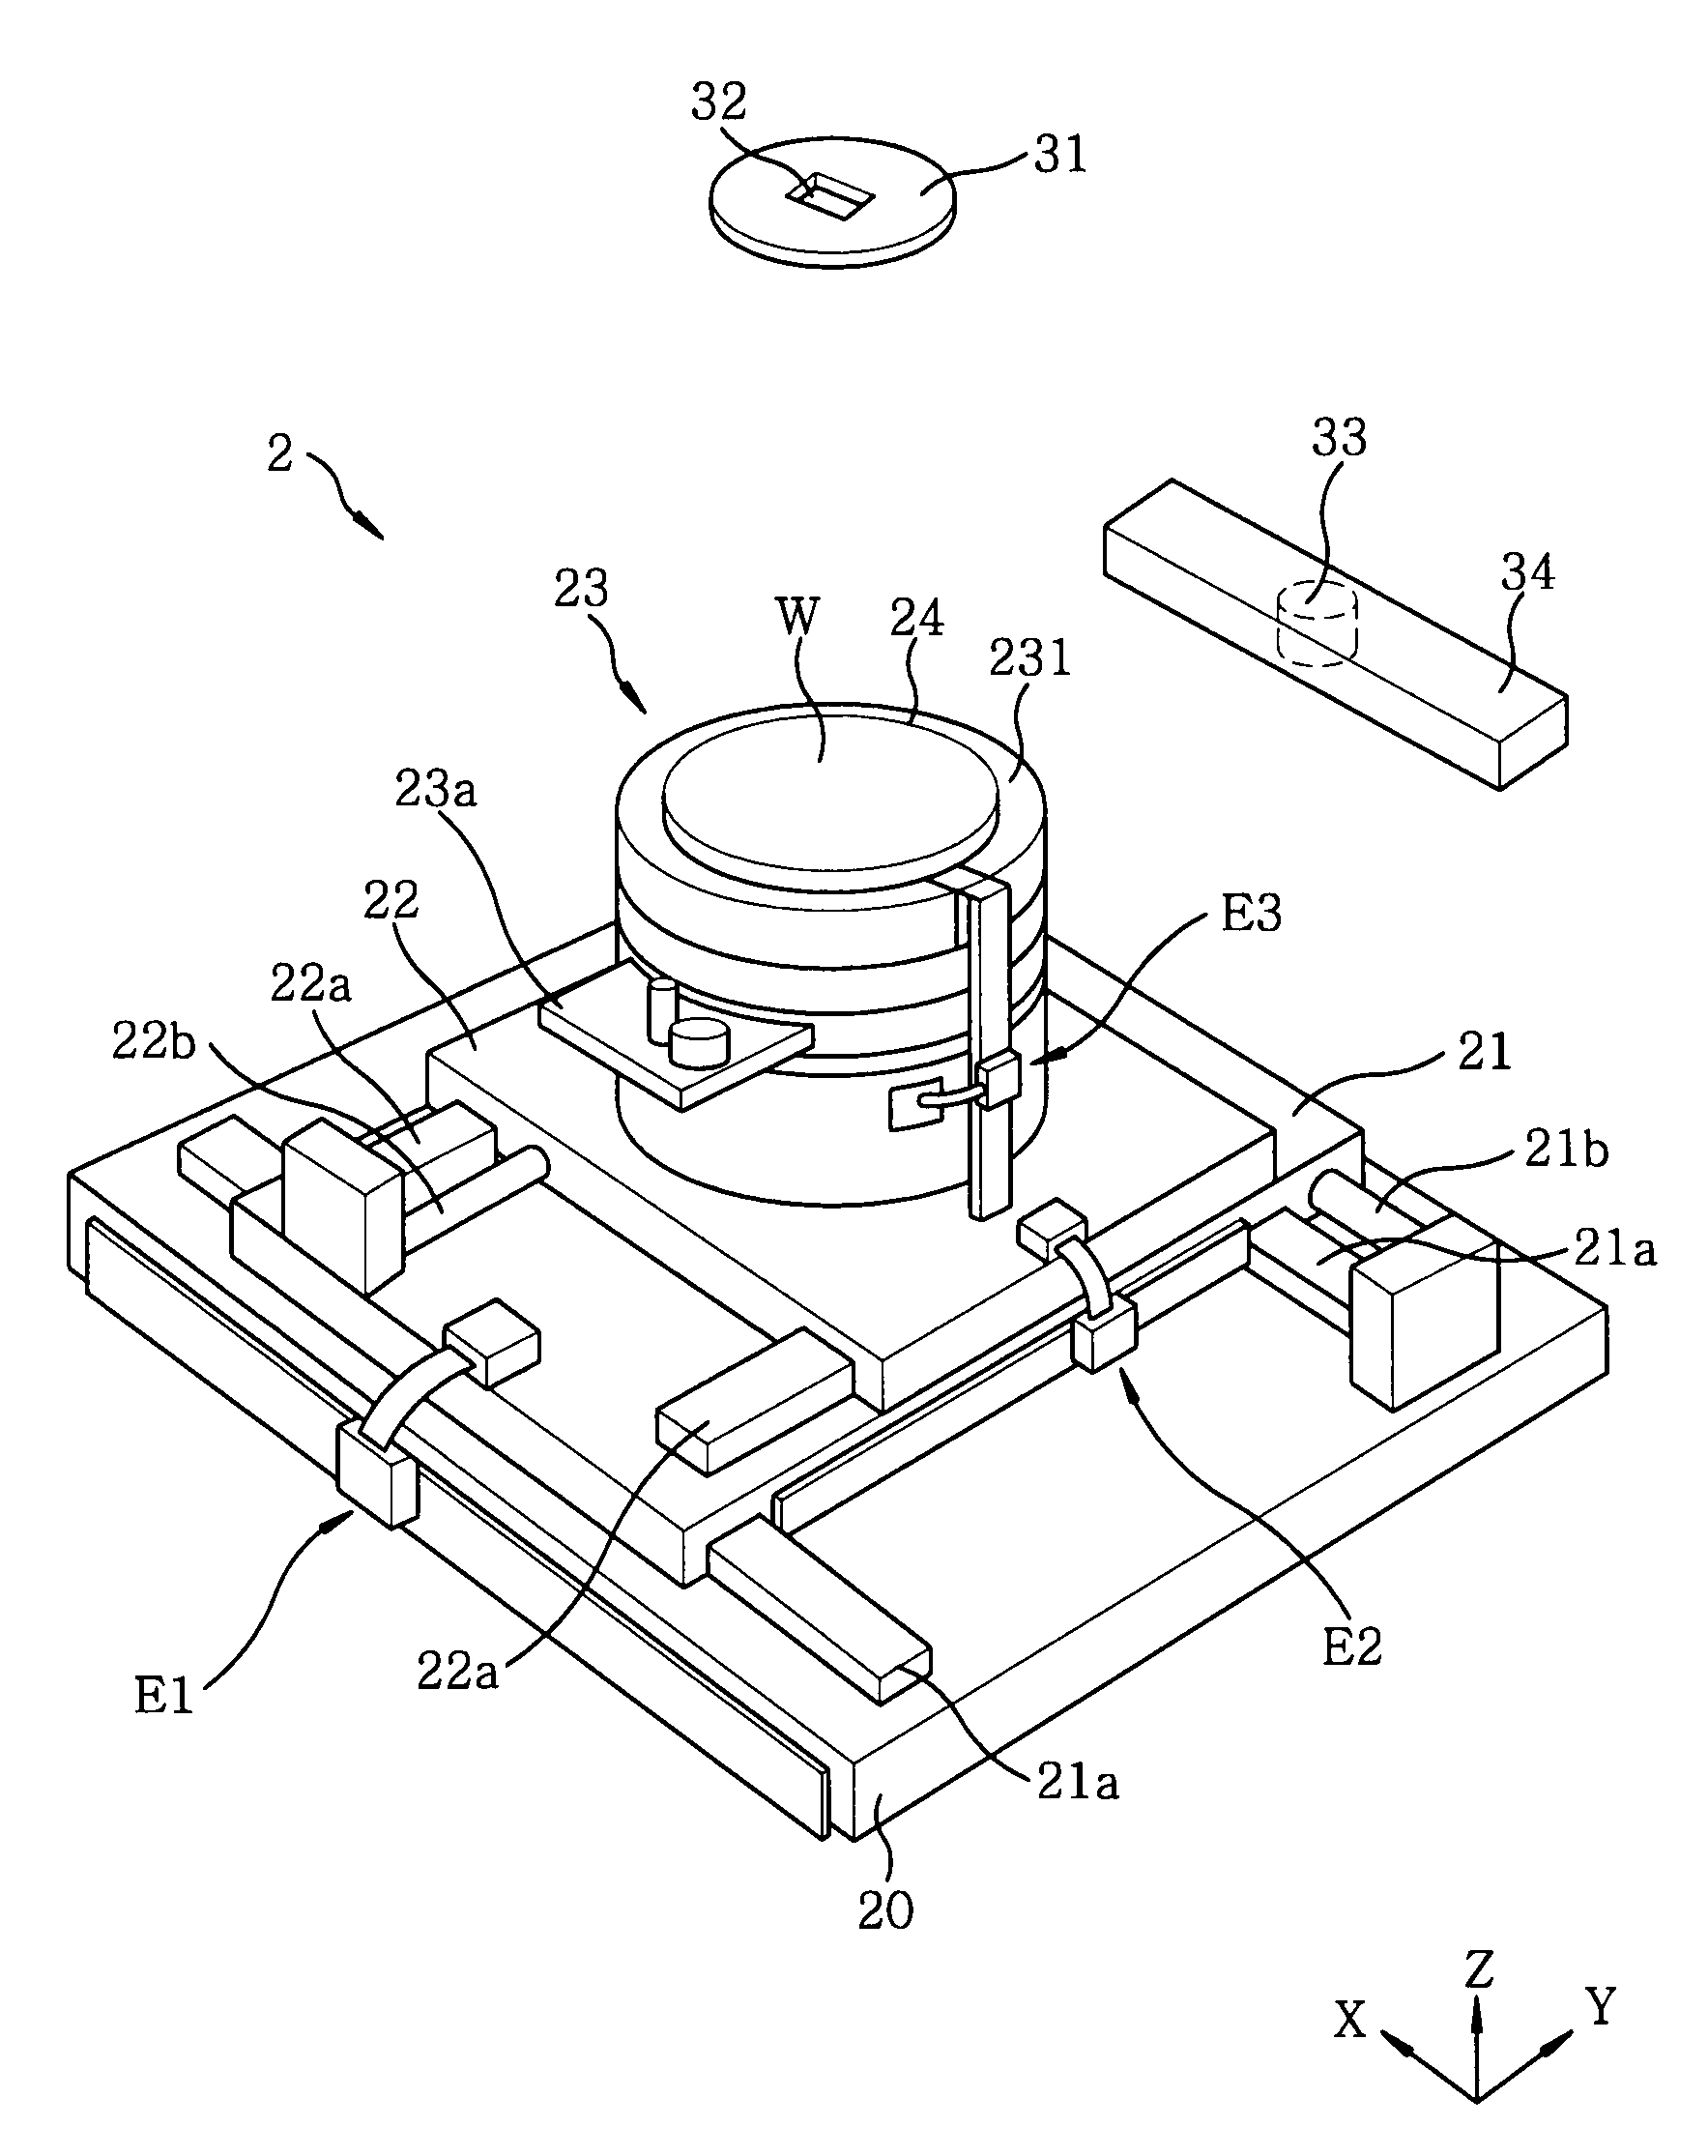 Probe apparatus and method for measuring electrical characteristics of chips